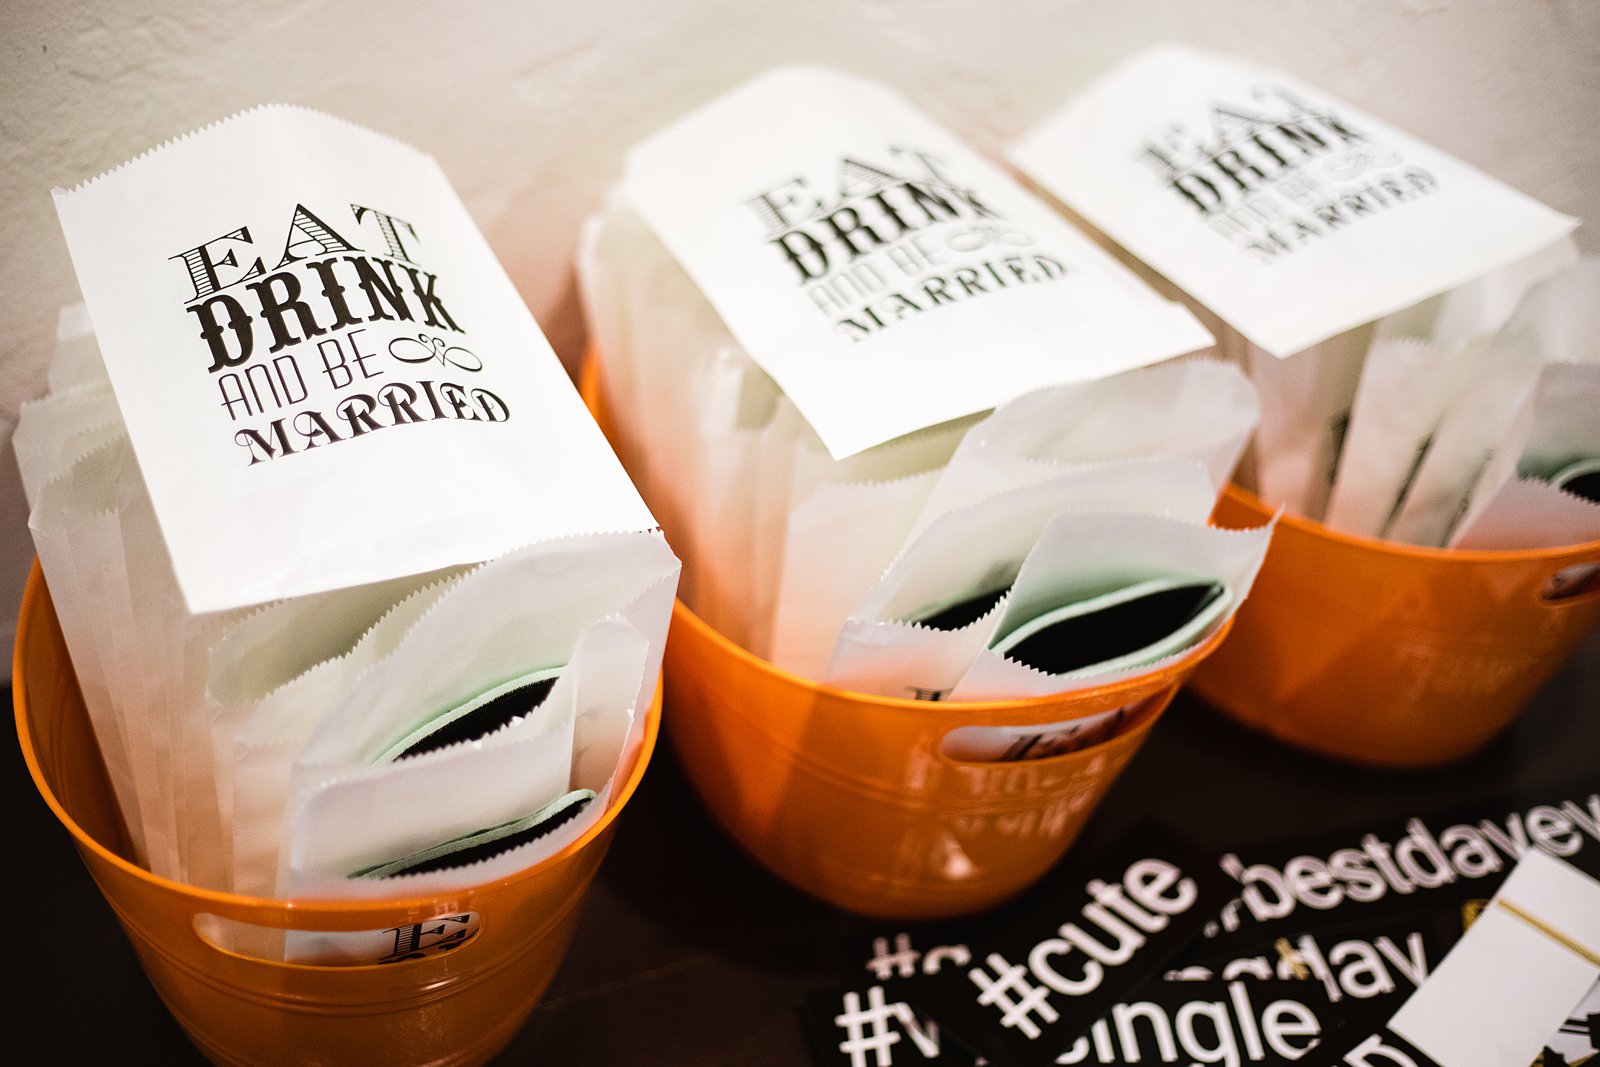 Eat, Drink, and be Married coozie wedding favor bags by Arizona wedding photographer PMA Photography.